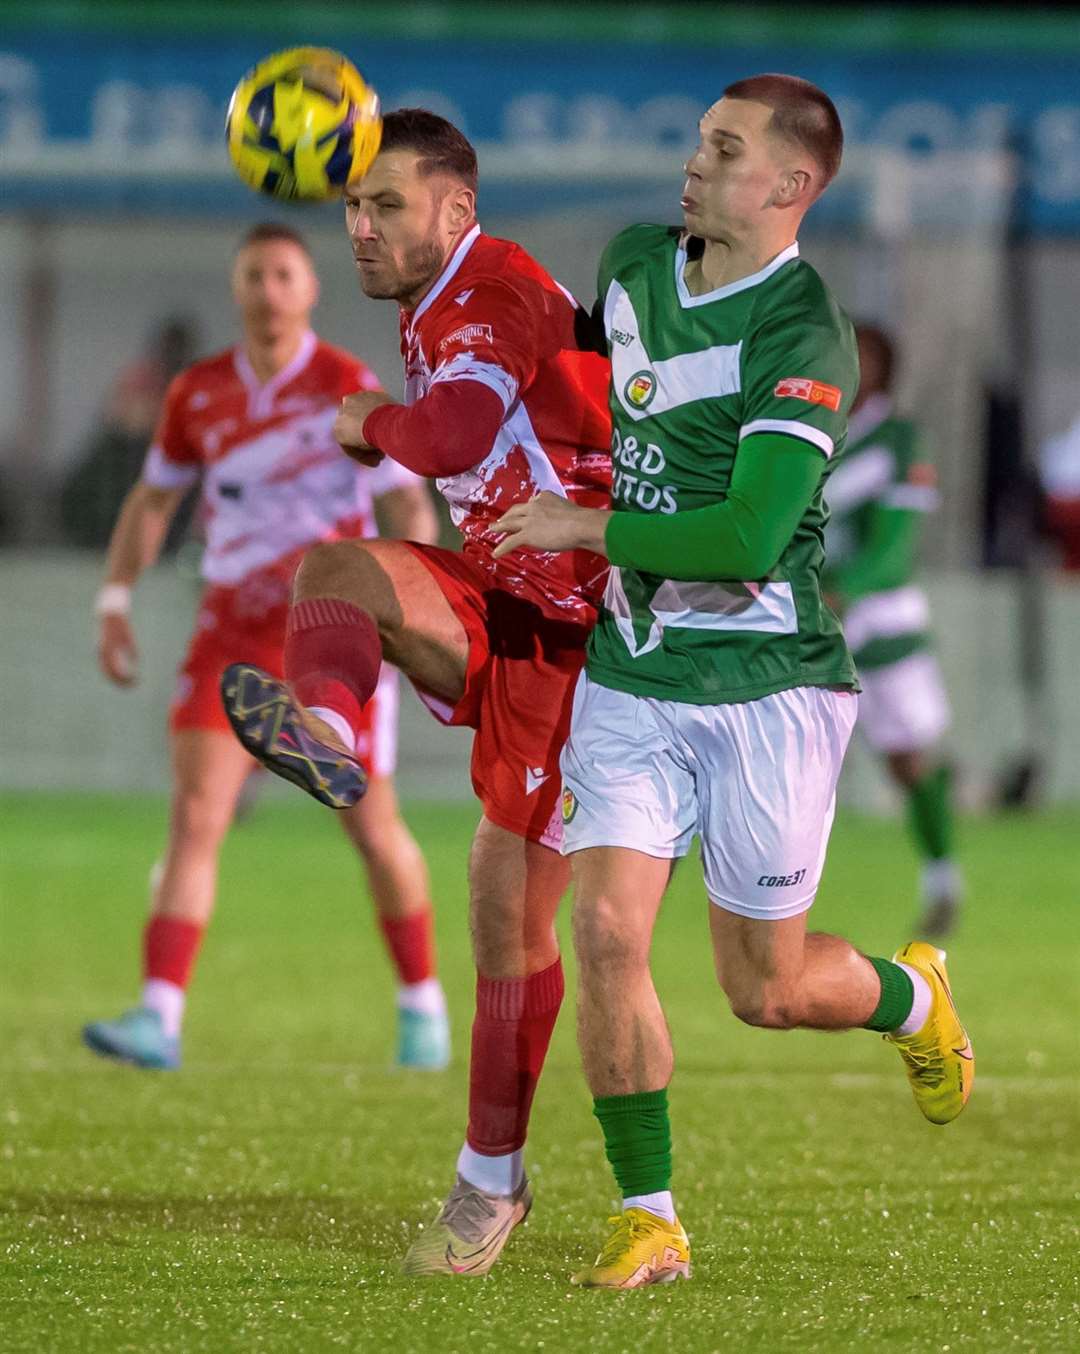 Ramsgate defender Craig Stone clears ahead of young Ashford forward Noah Carney last Tuesday Picture: Ian Scammell